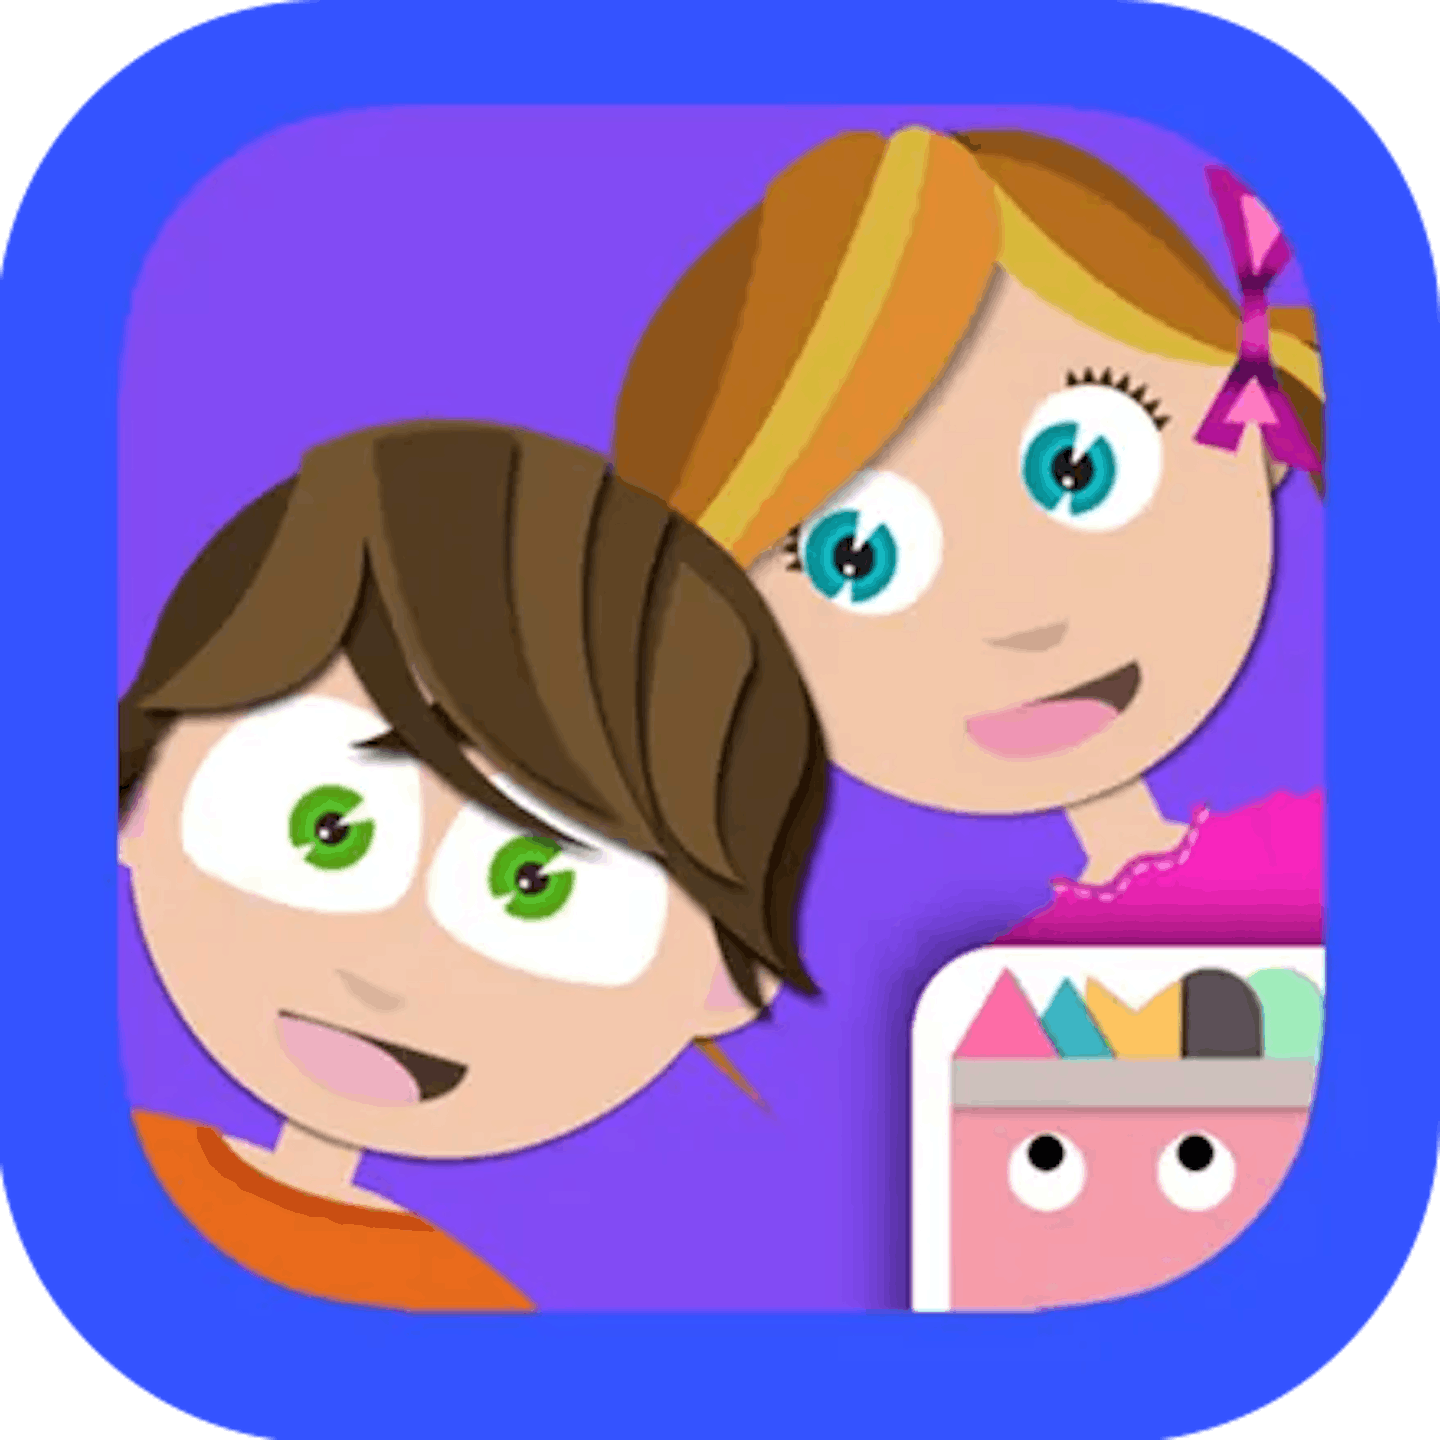 Baby games for 2,3,4 year olds on the App Store